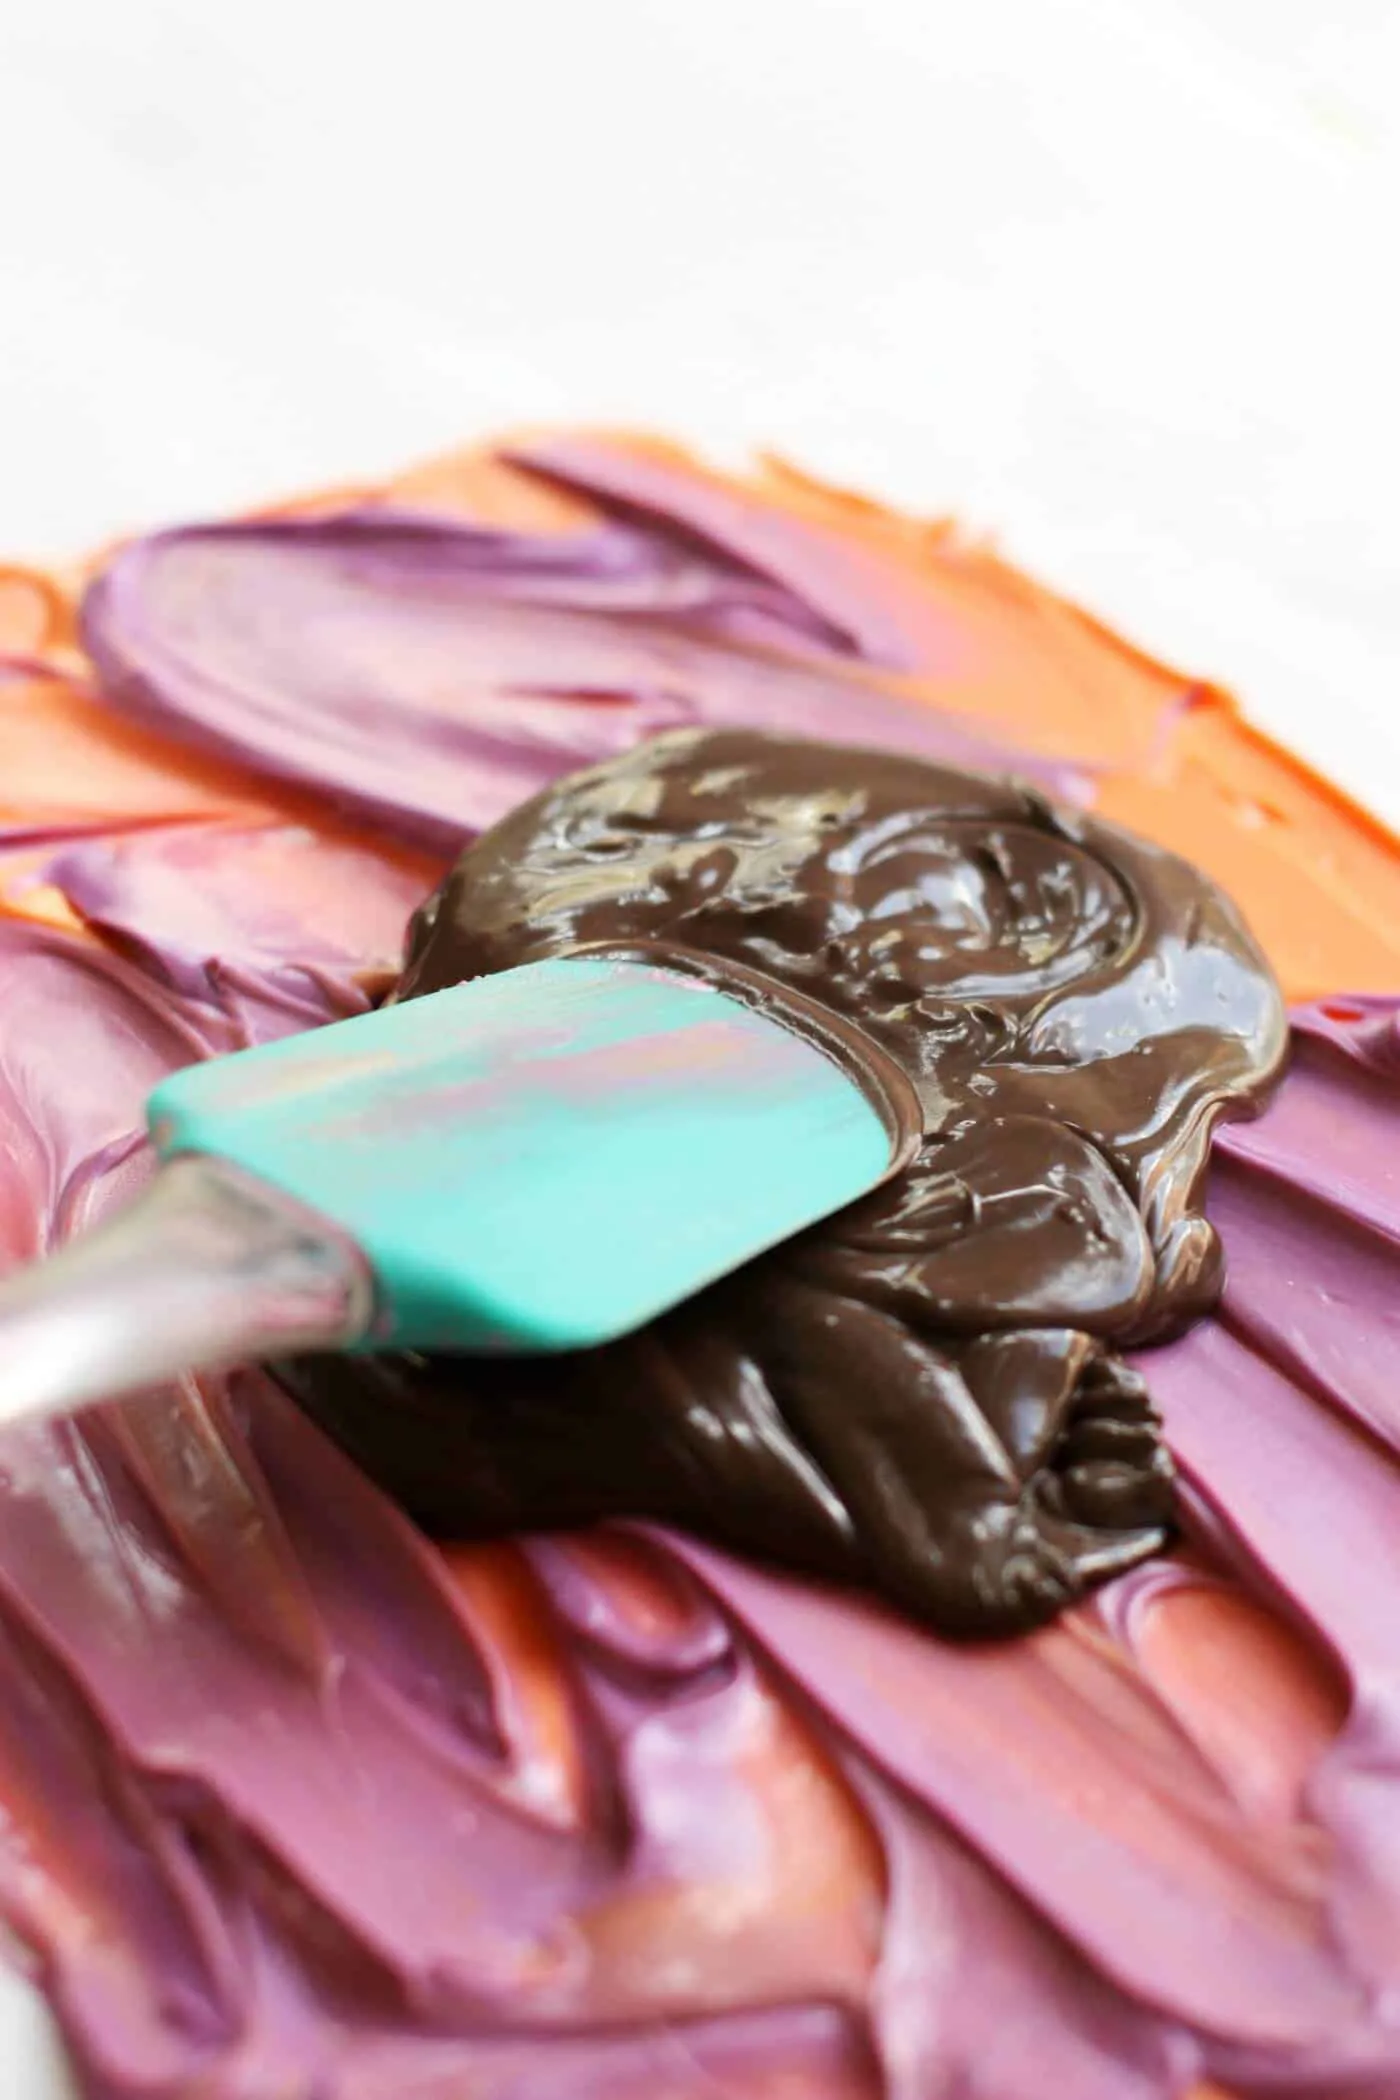 Halloween candy melts smoothing with a spatula